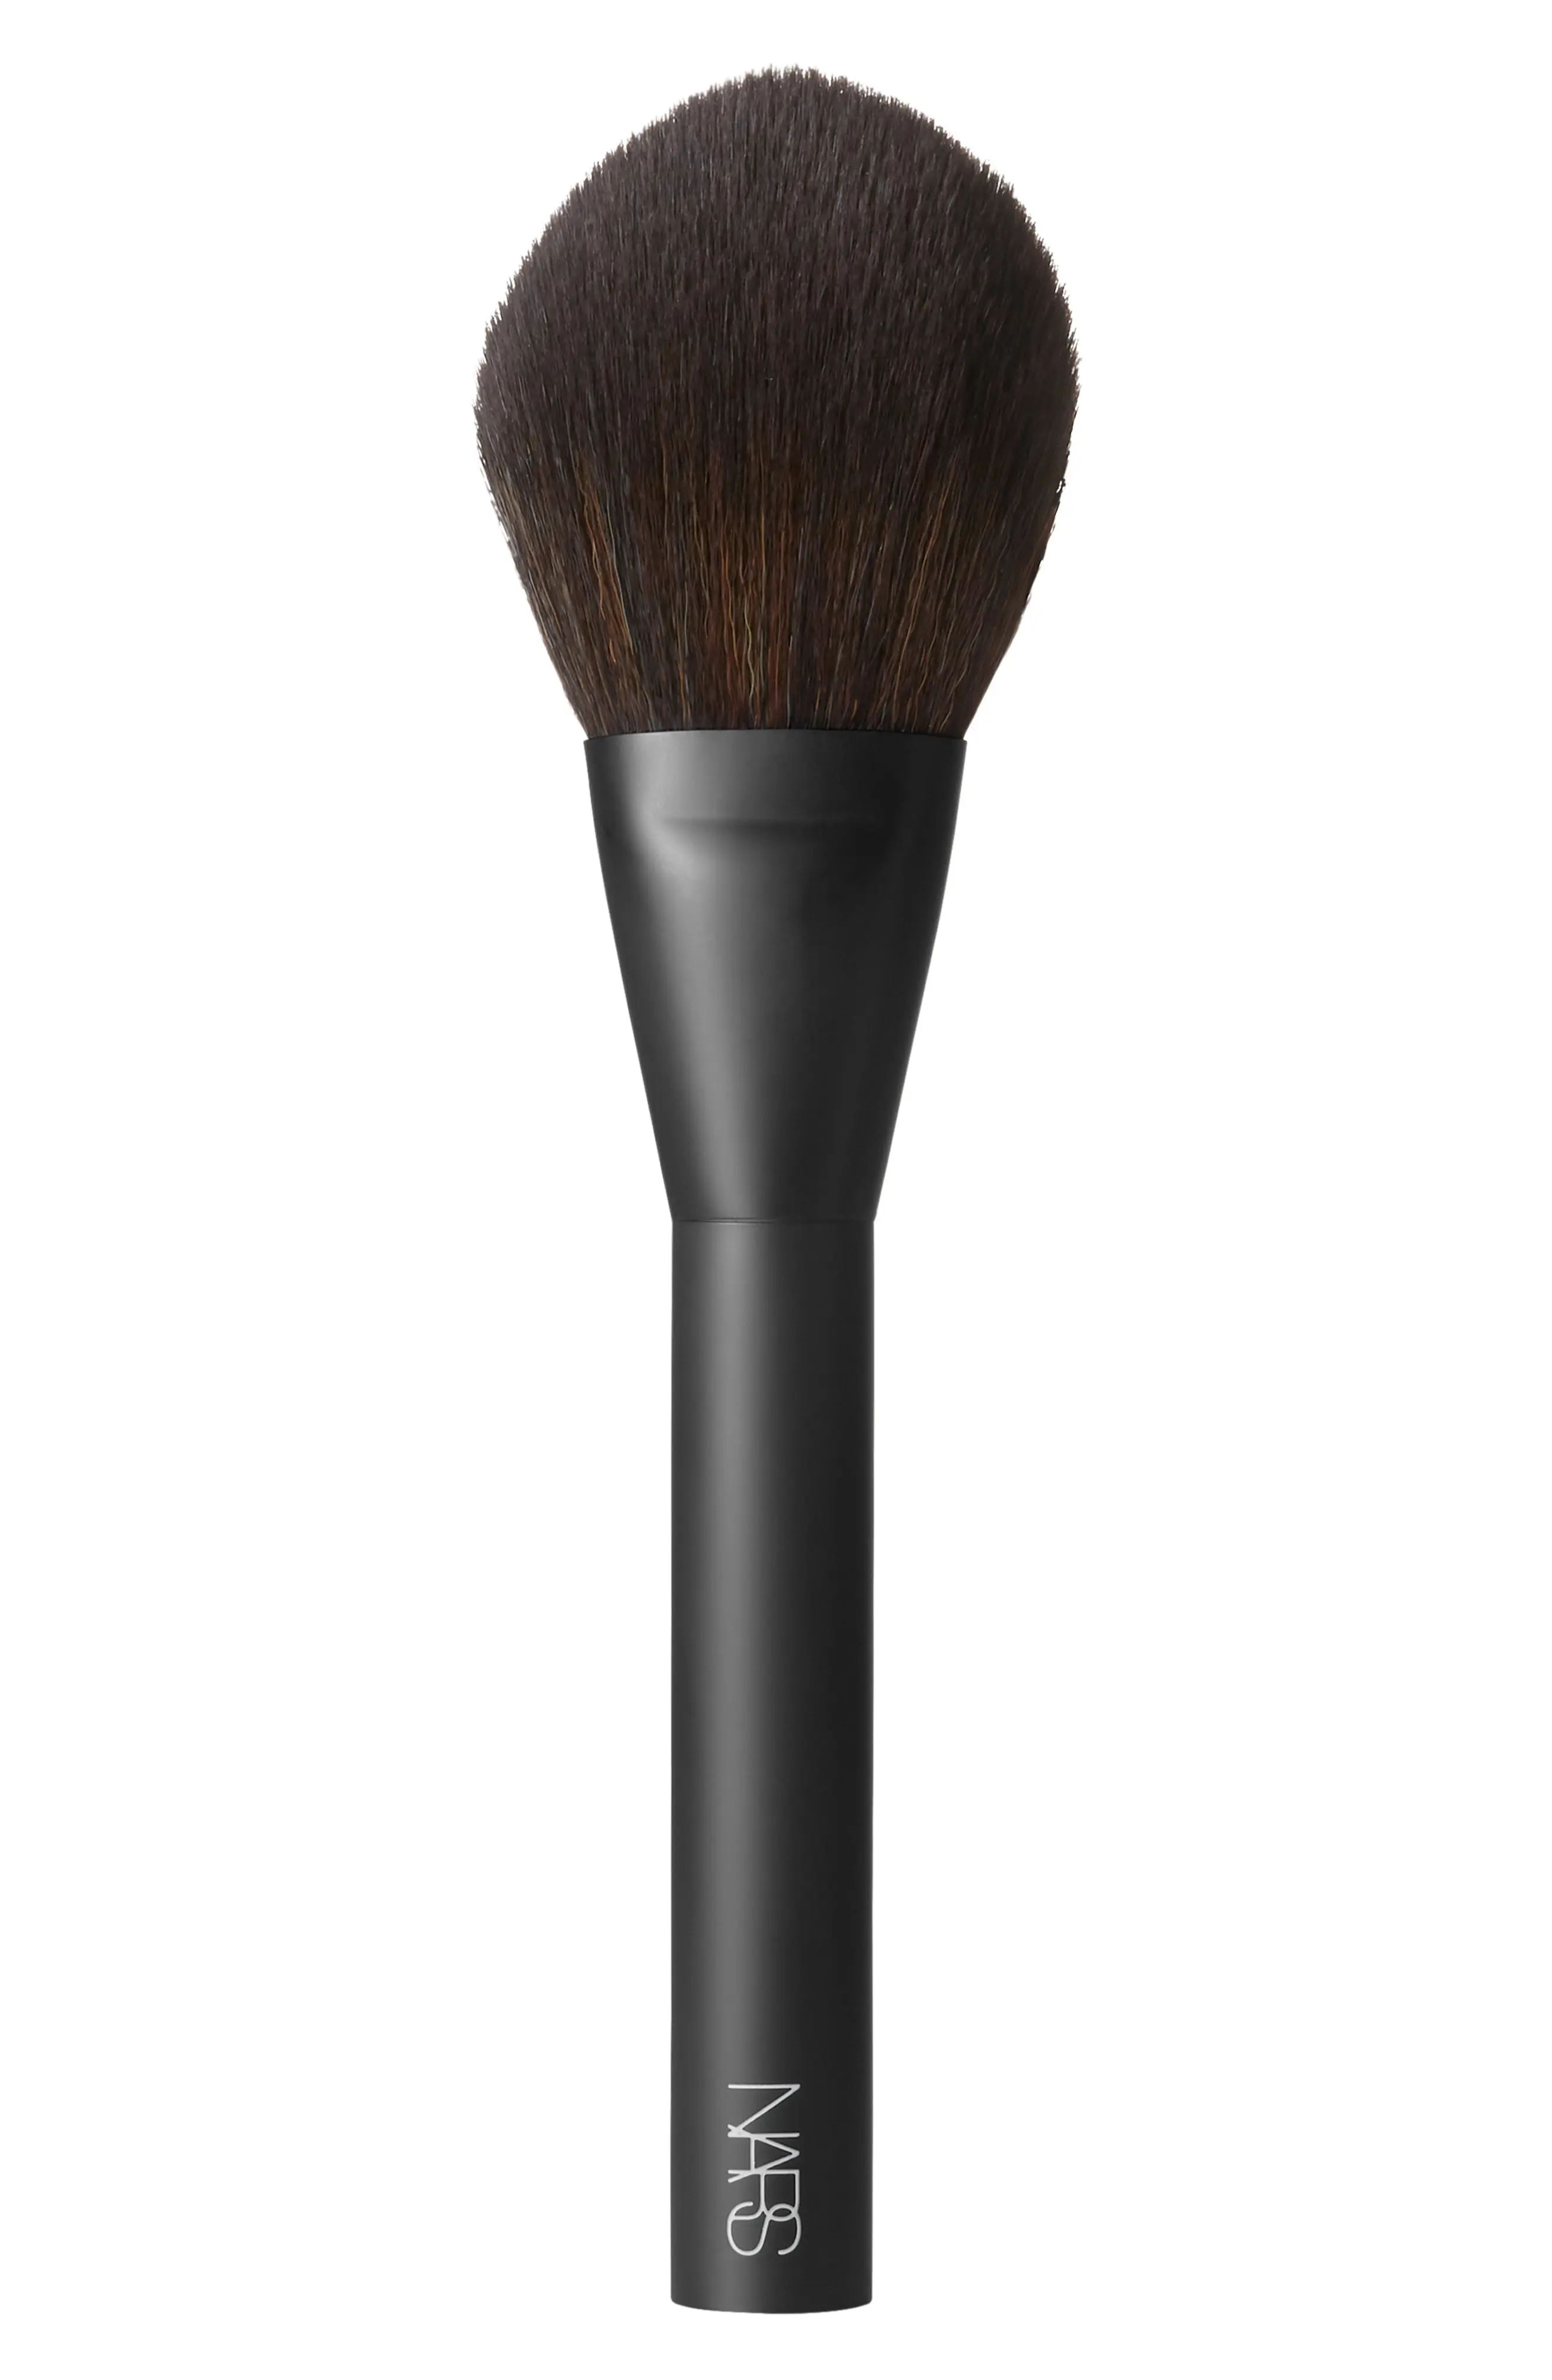 Nars #13 Powder Brush, Size One Size - No Color | Nordstrom